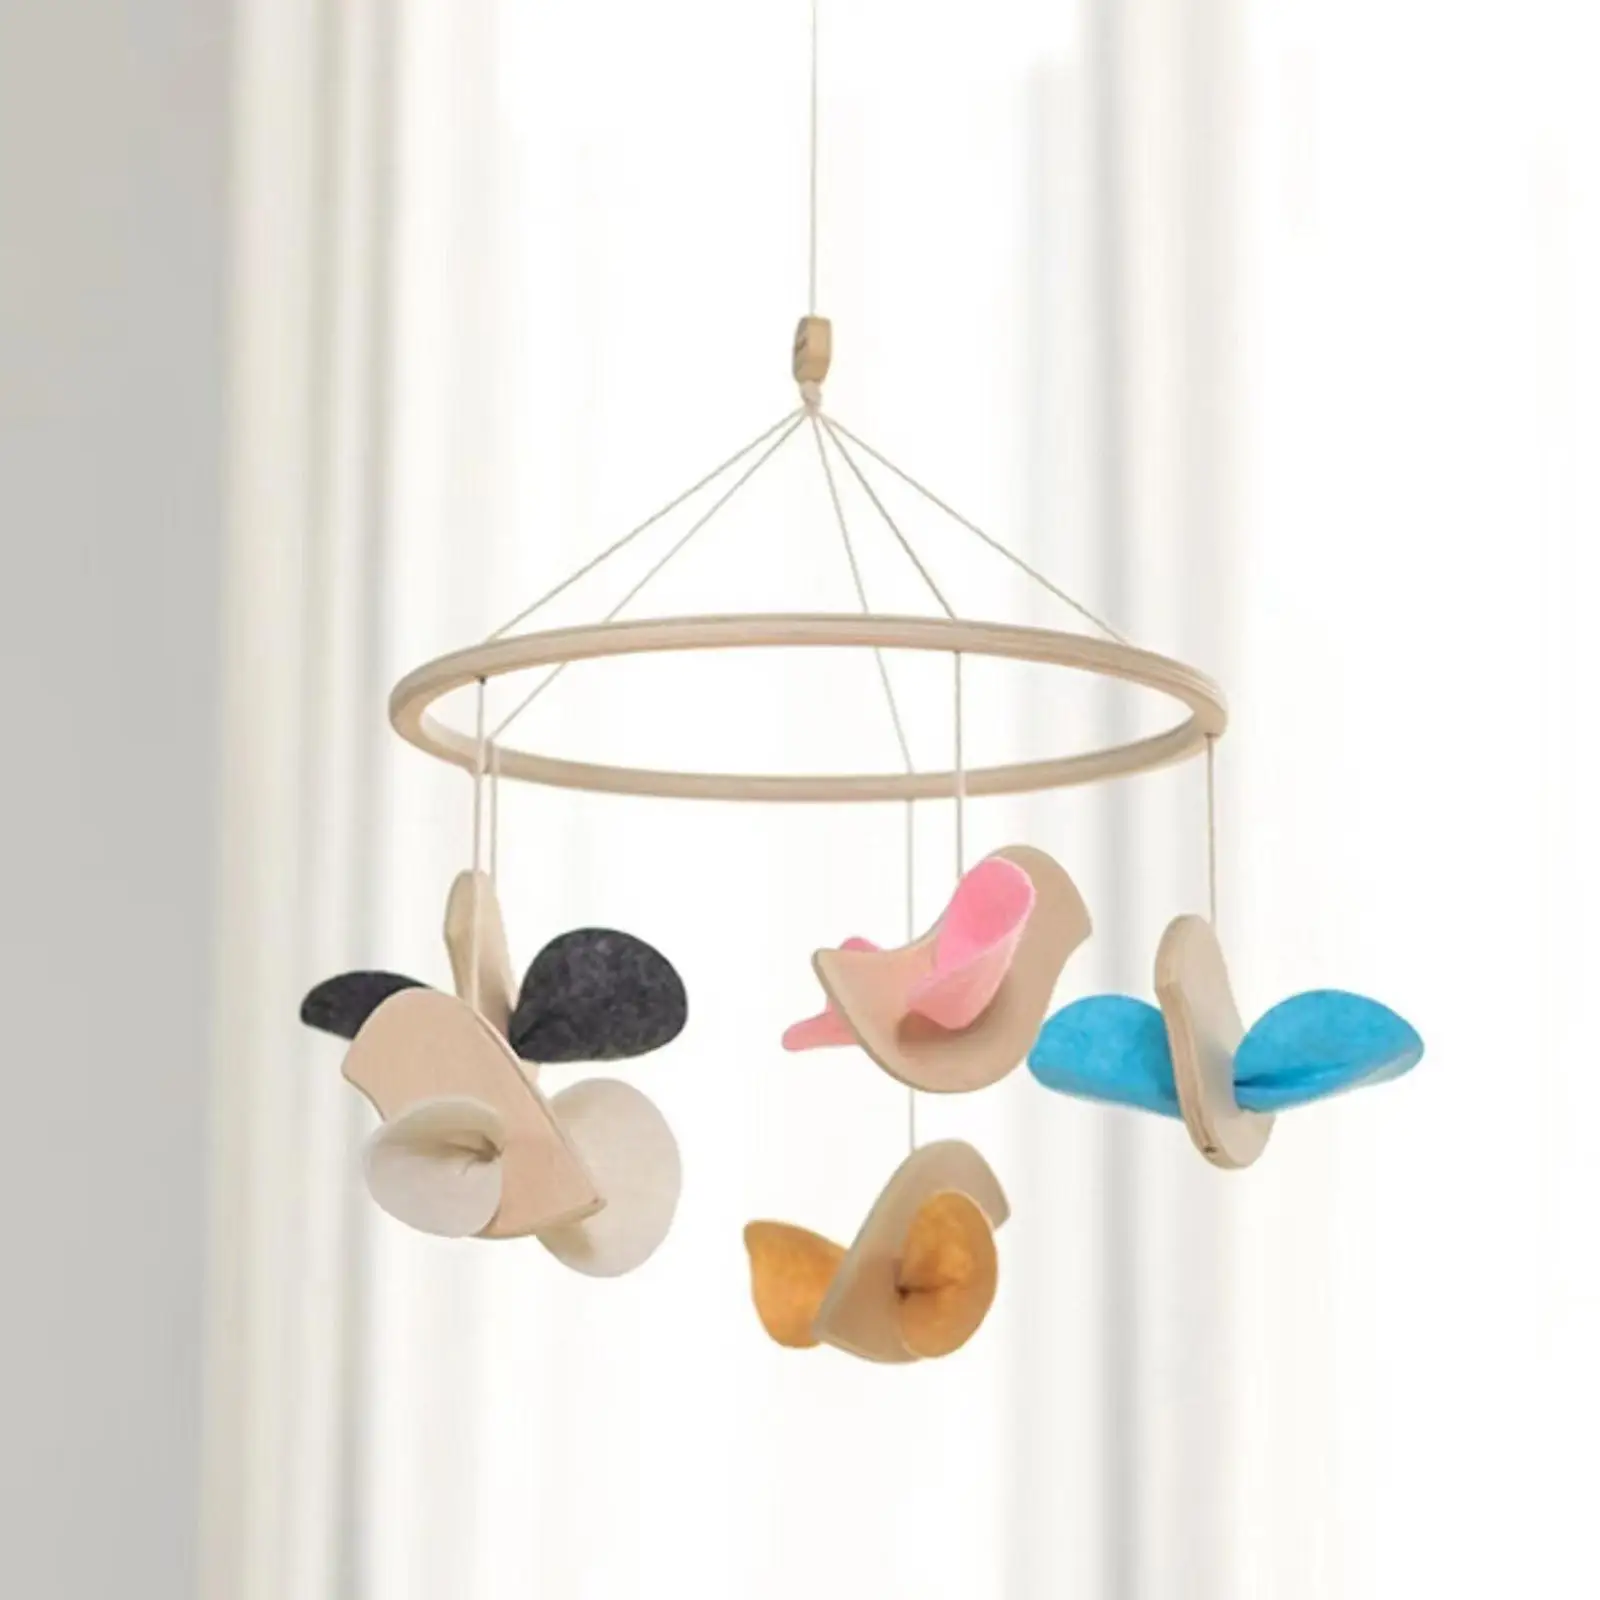 Baby Bed Wind Chime Hanging Bed Bell Windbell, for Outdoor Crib Bed Baby Bedroom